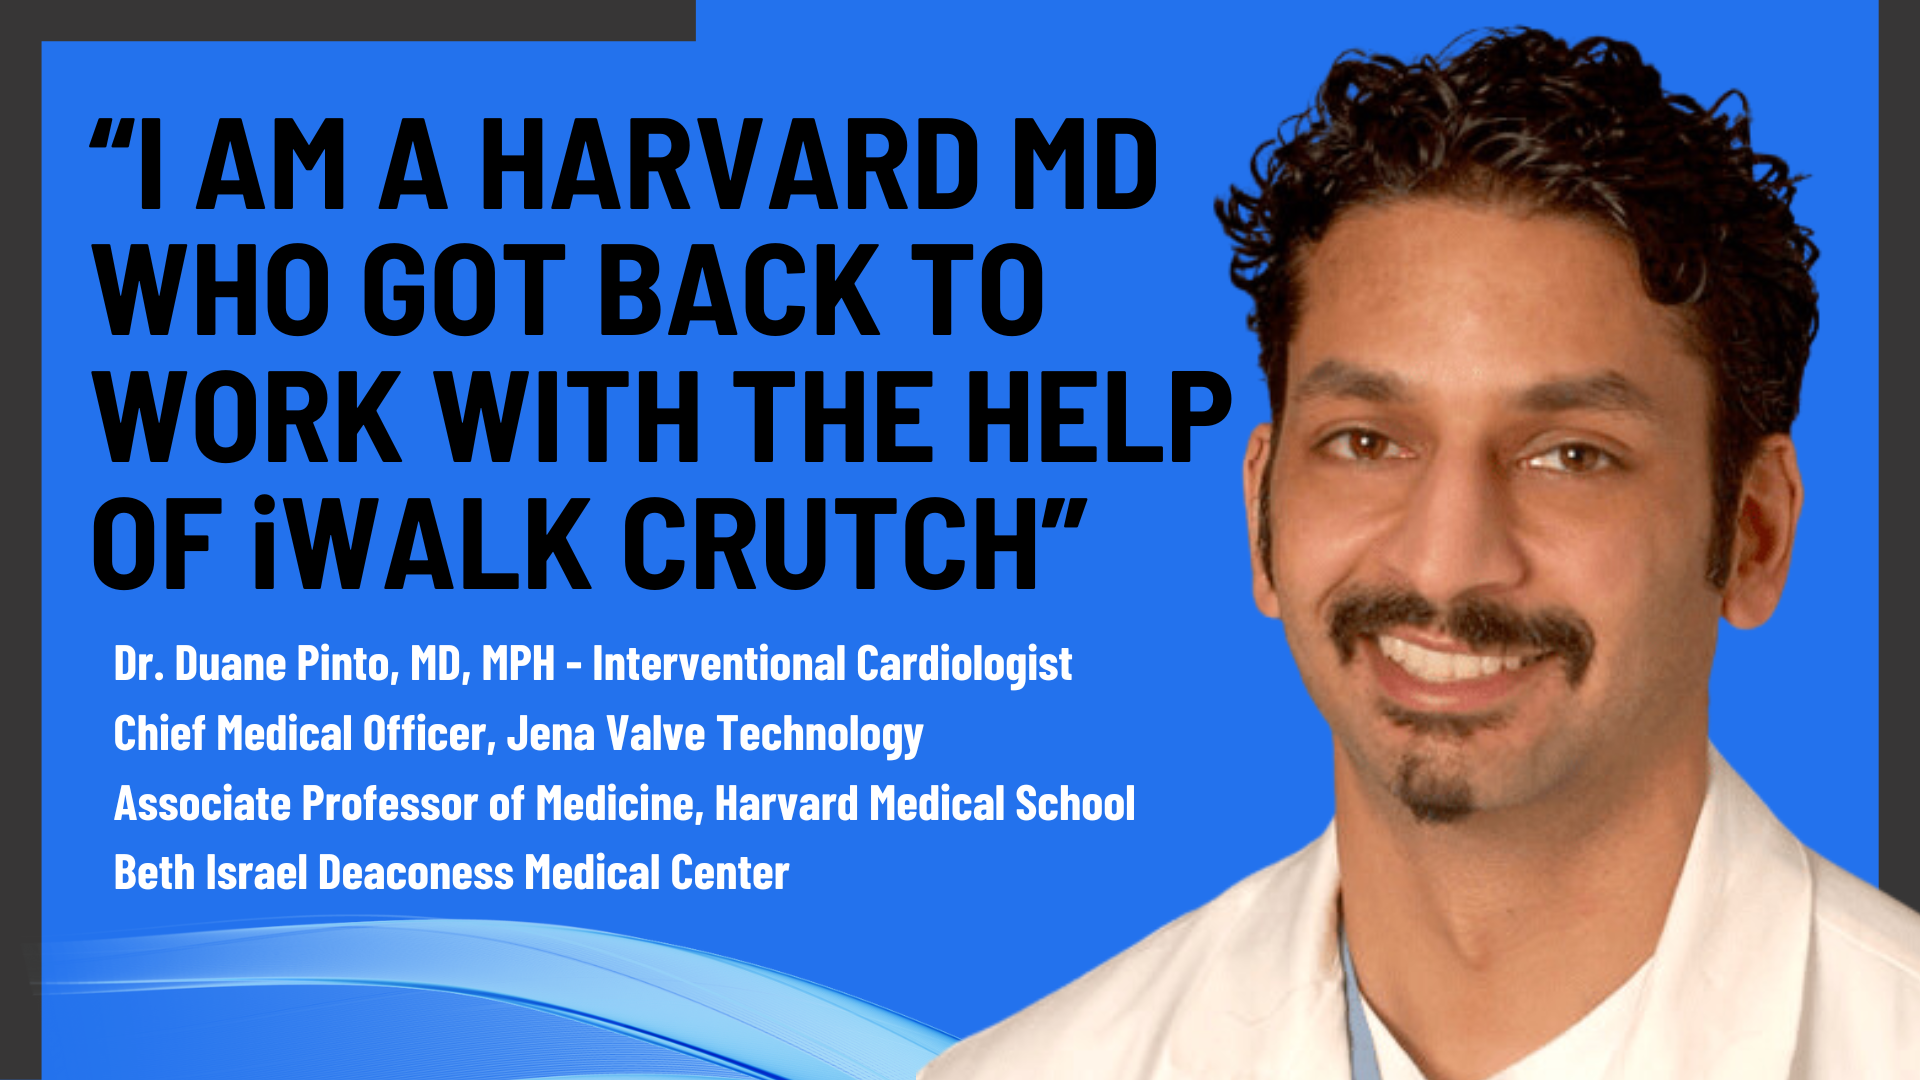 Dr Duane Pinto, MD, MPH chooses iWALK Crutch for Recovery